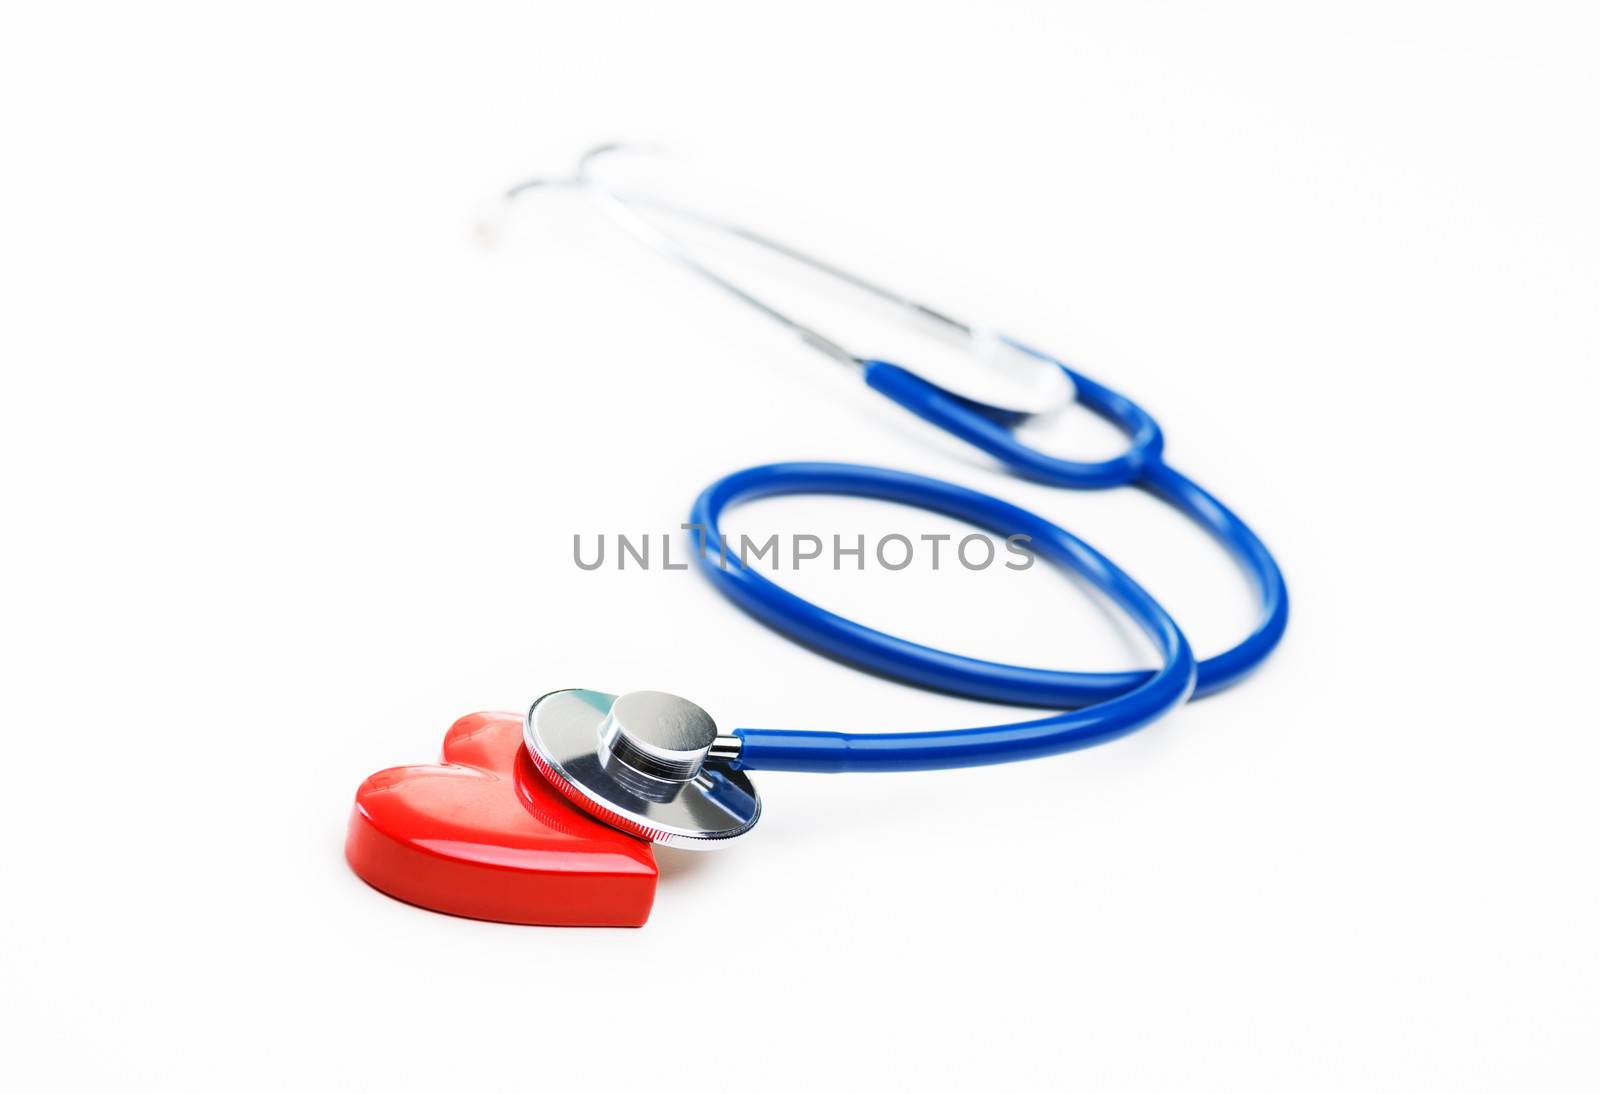 Stethoscope and heart shaped object by stokkete